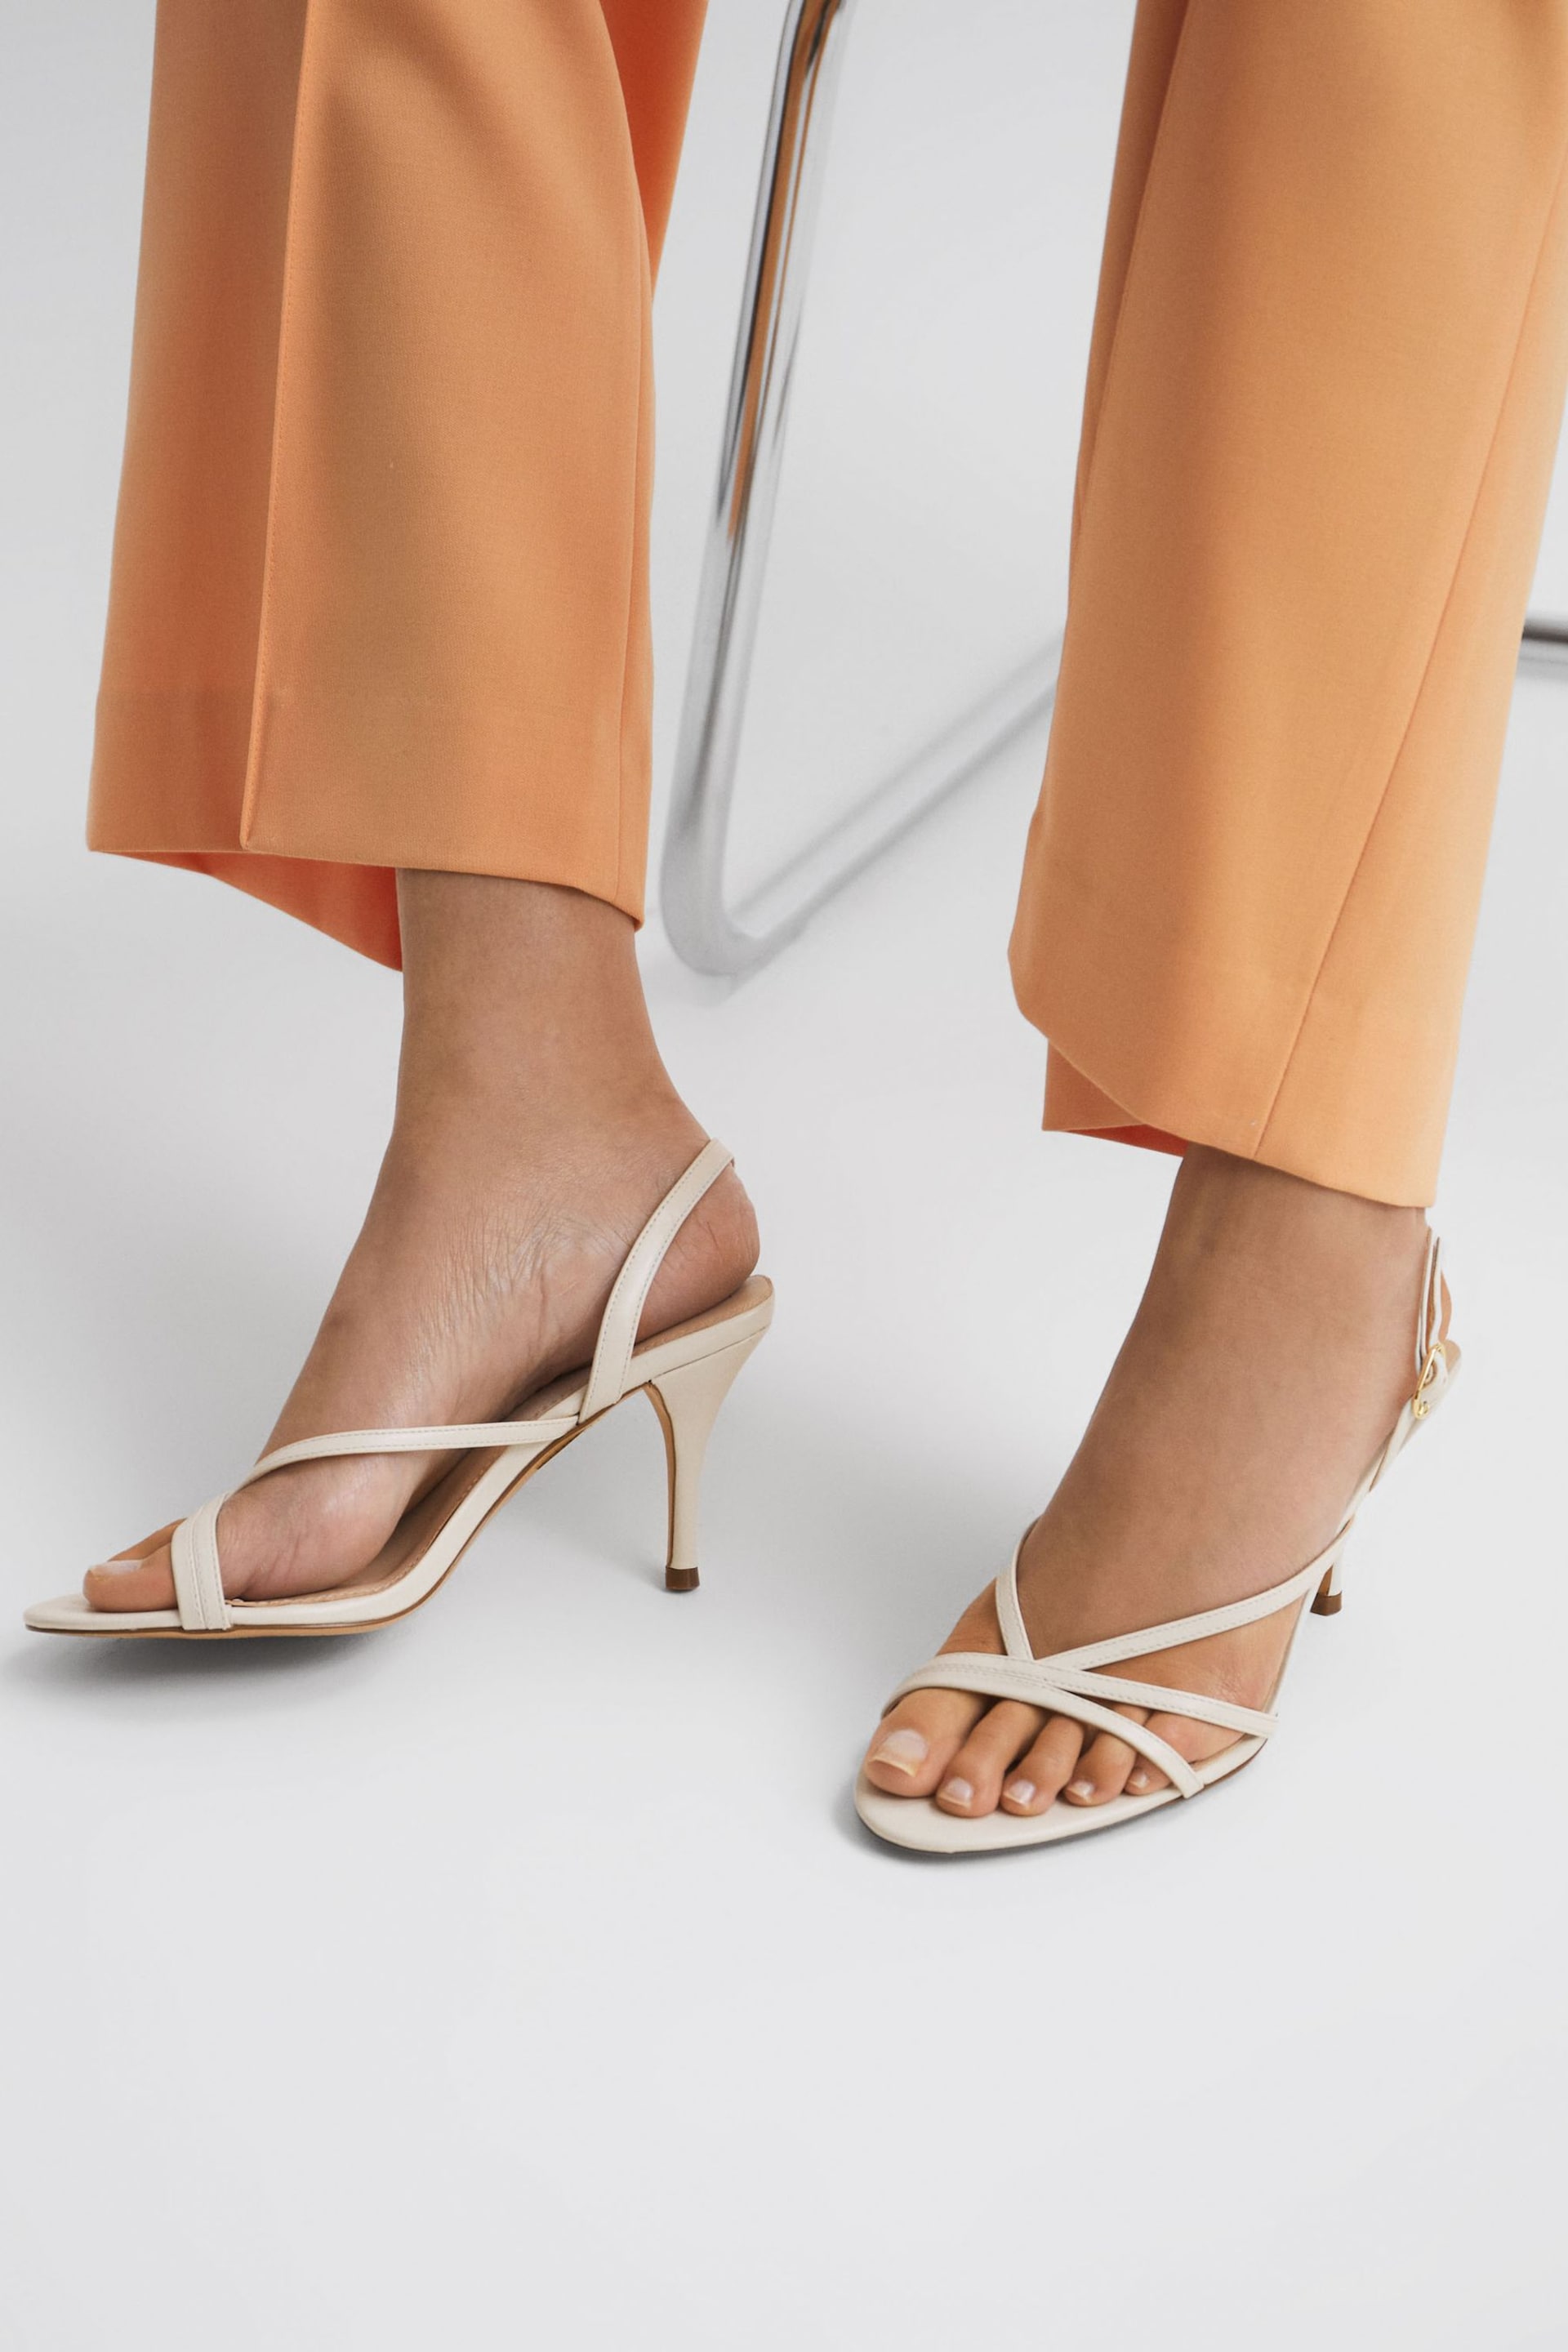 Reiss White Clara Strappy Mid Heel Sandals - Image 3 of 6